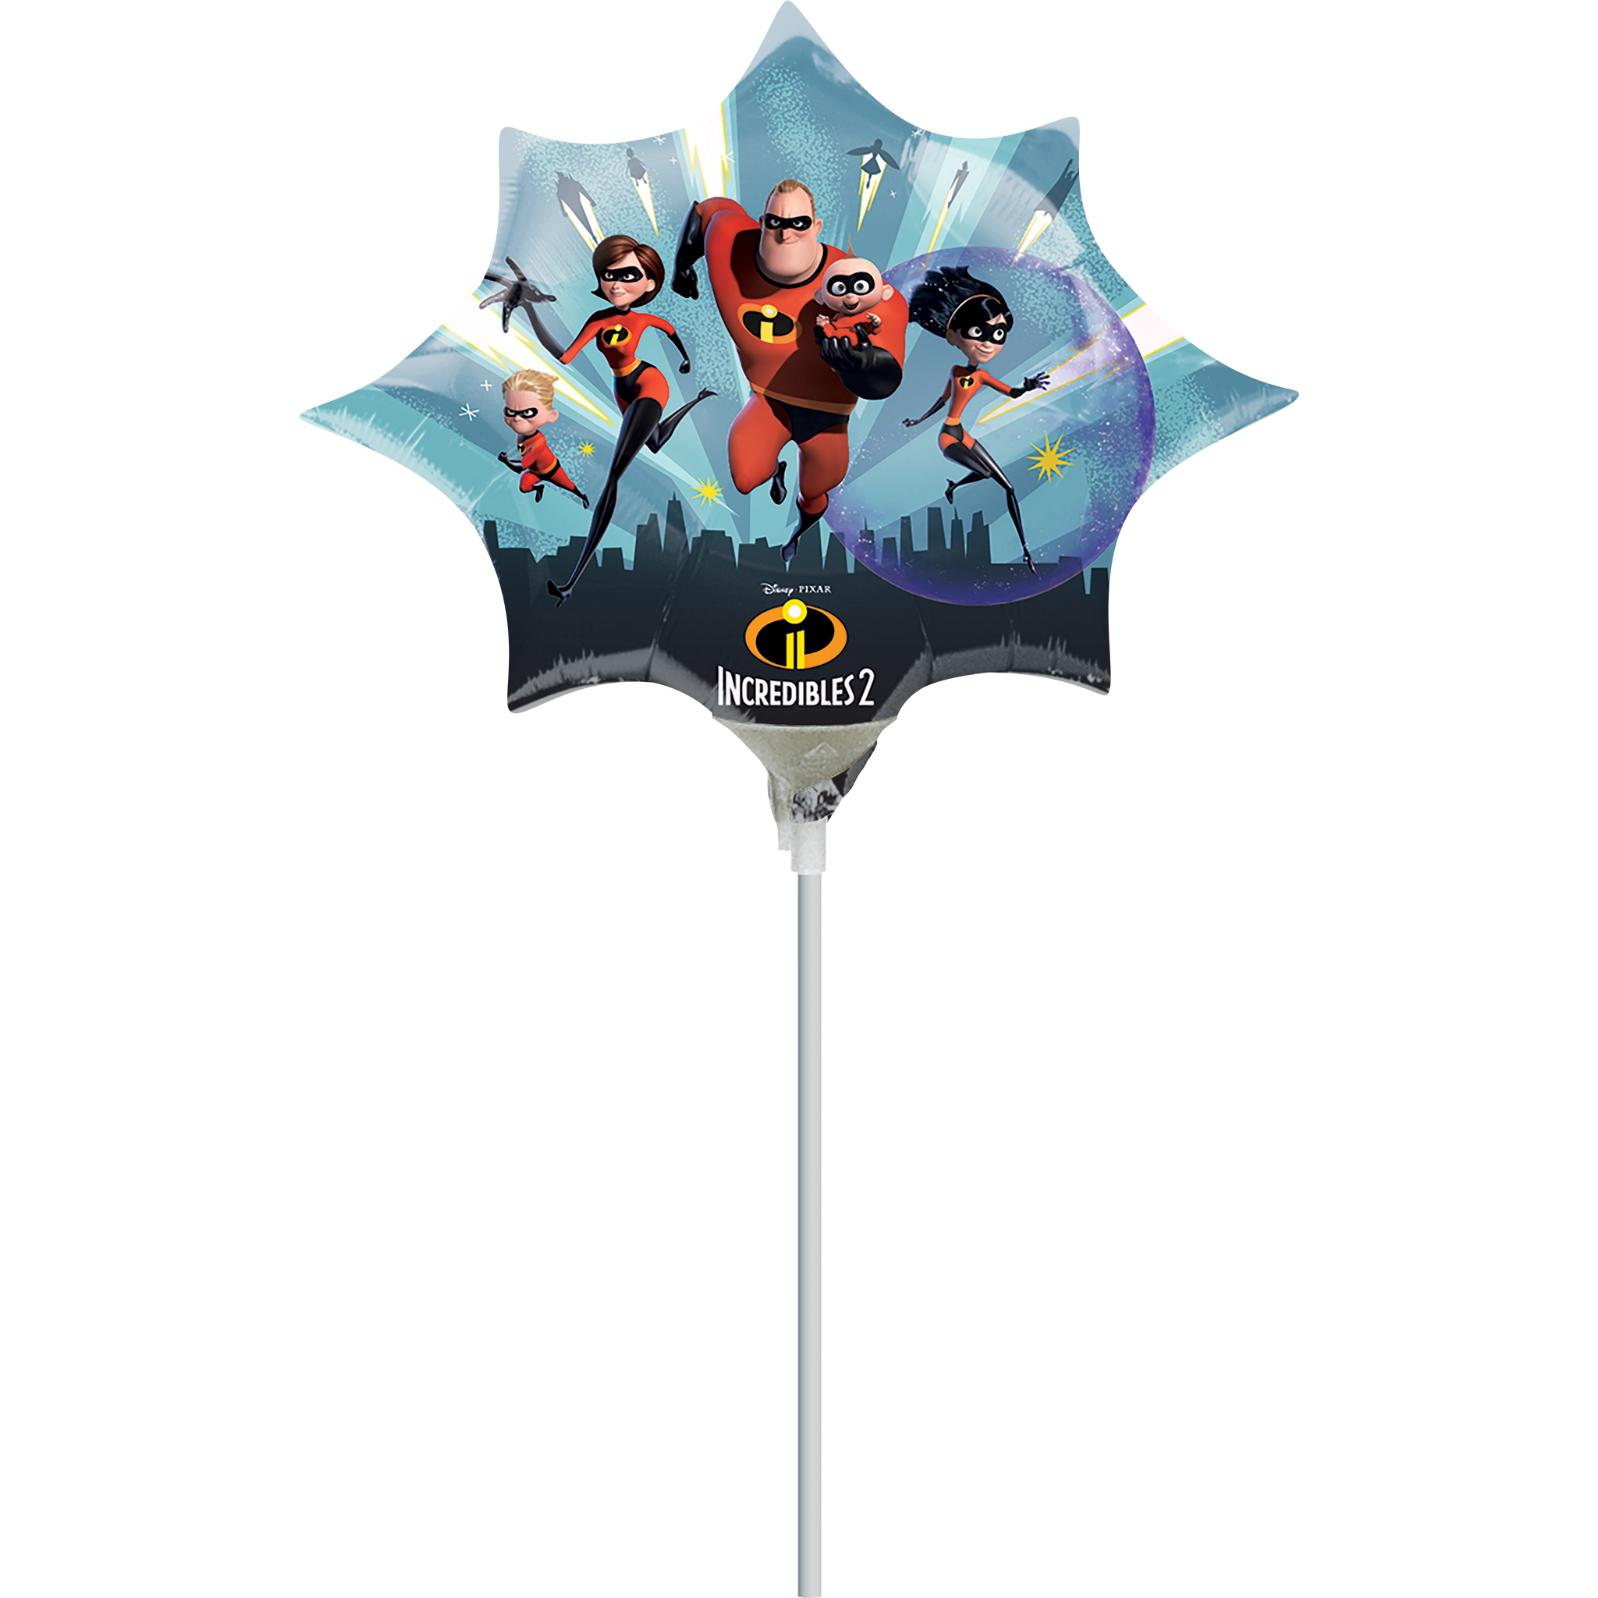 The Incredibles 2 Mini Shape Foil Balloon Balloons & Streamers - Party Centre